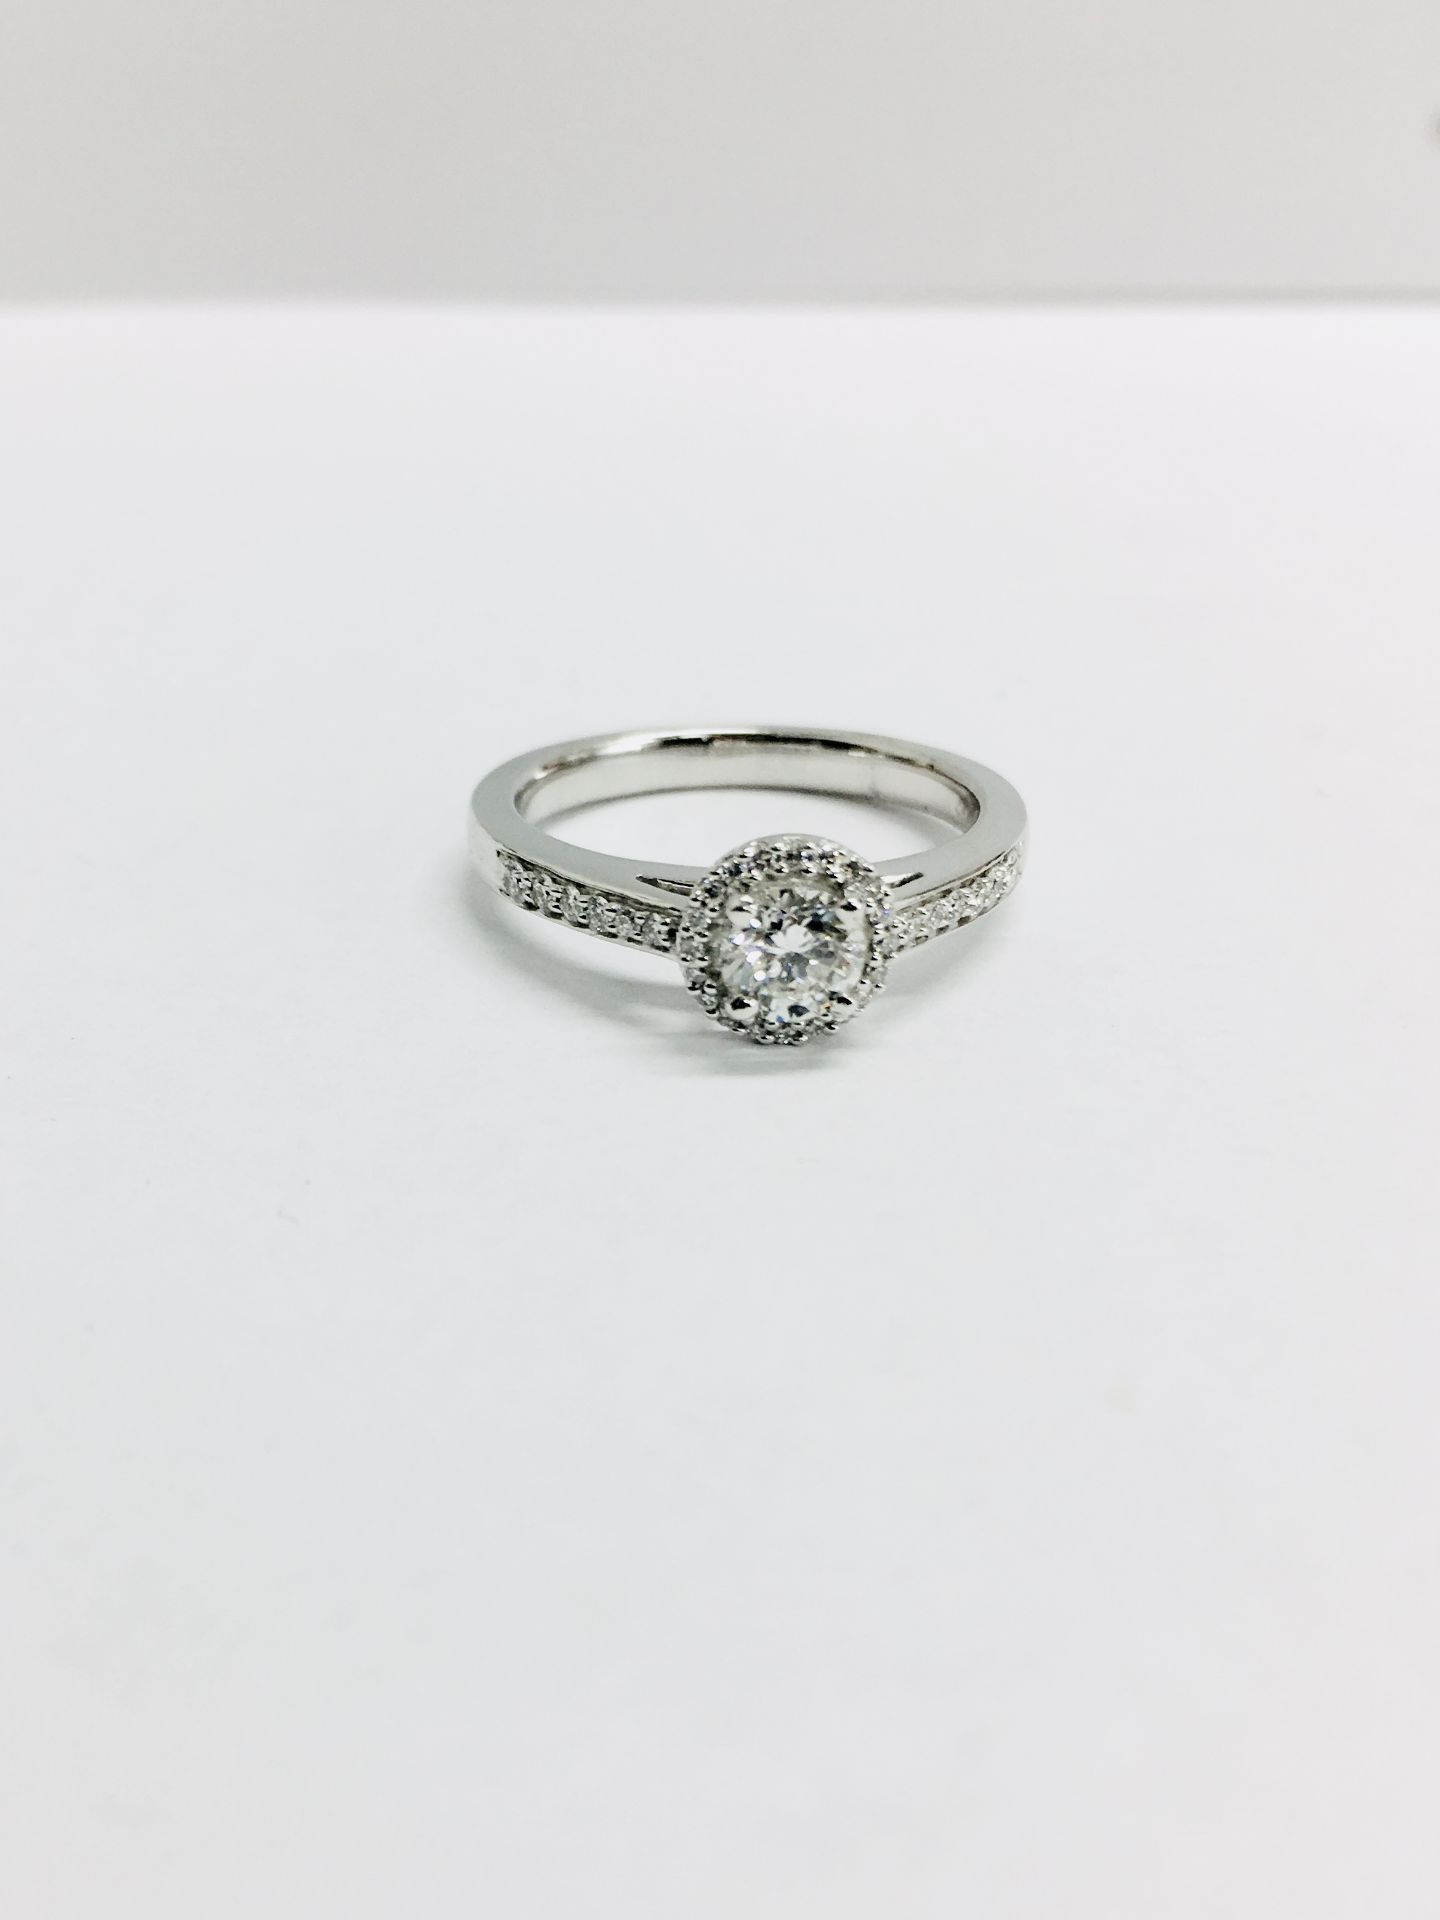 18ct white gold Halo style solitaire ring,0.50ct natural diamond D colour,vs clarity,0.28ct h Colour - Image 7 of 7